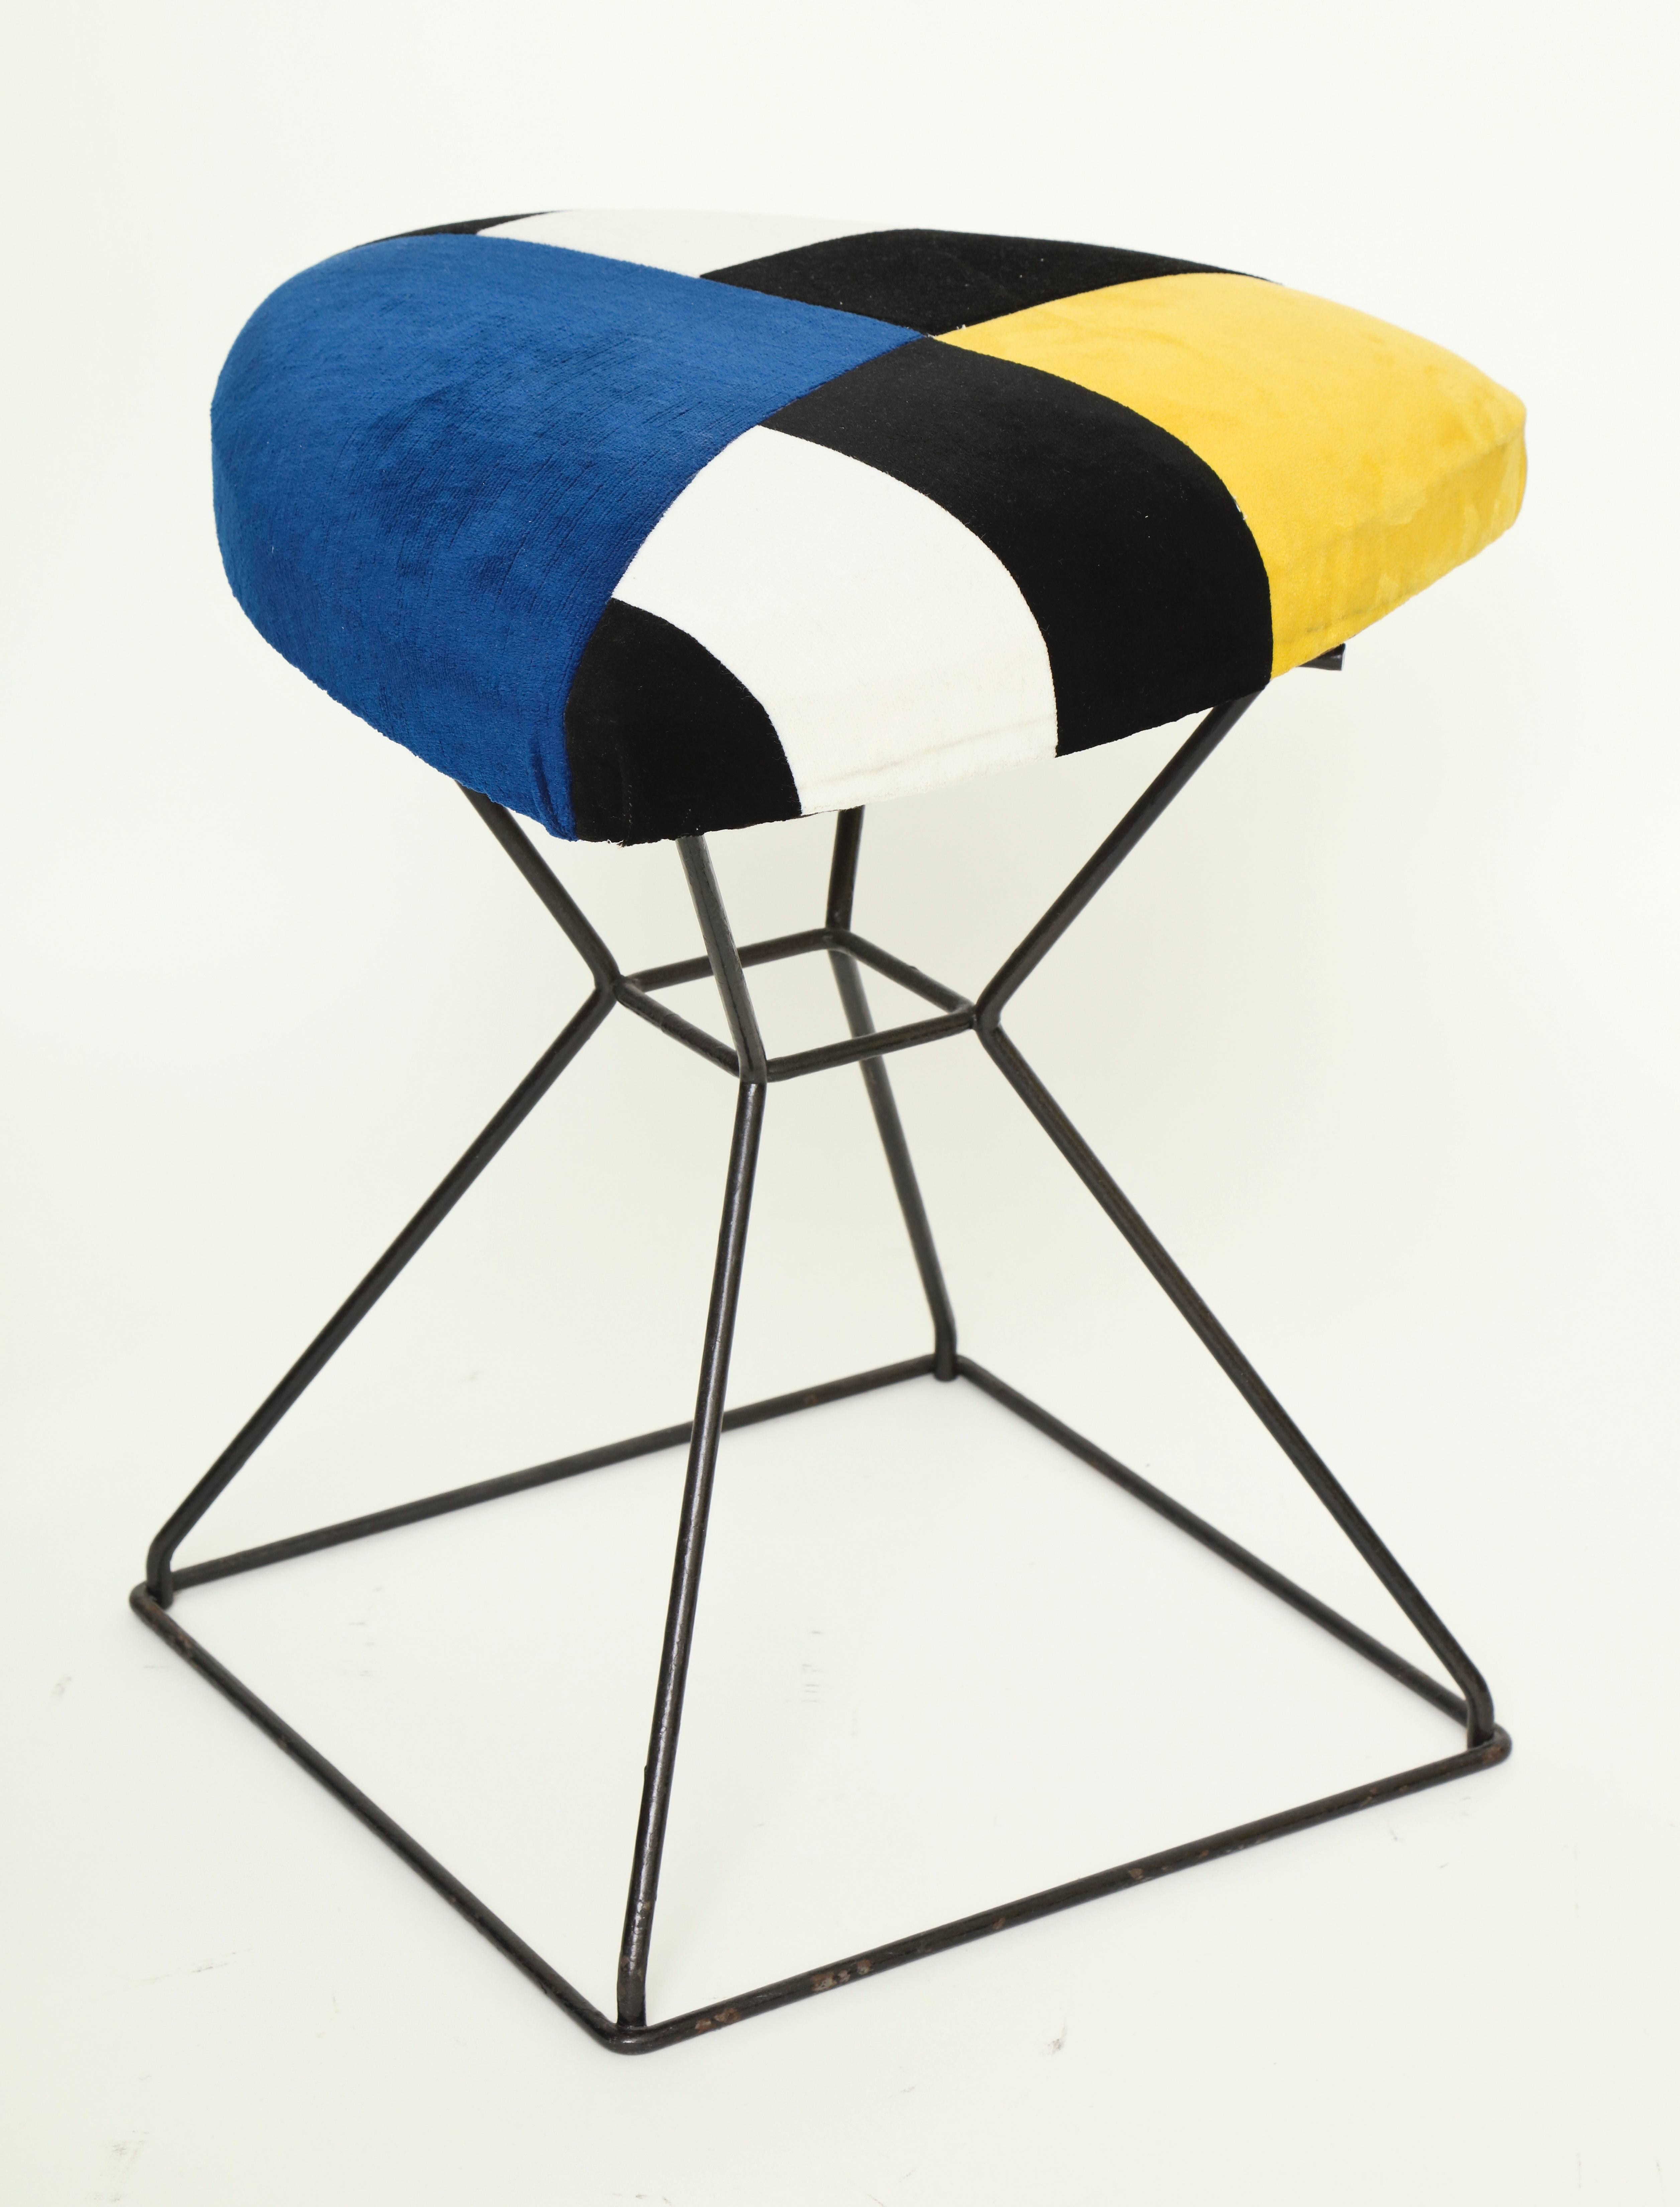 Pair of metal frame base stools with custom-made cushions in graphic ultra-suede pattern.